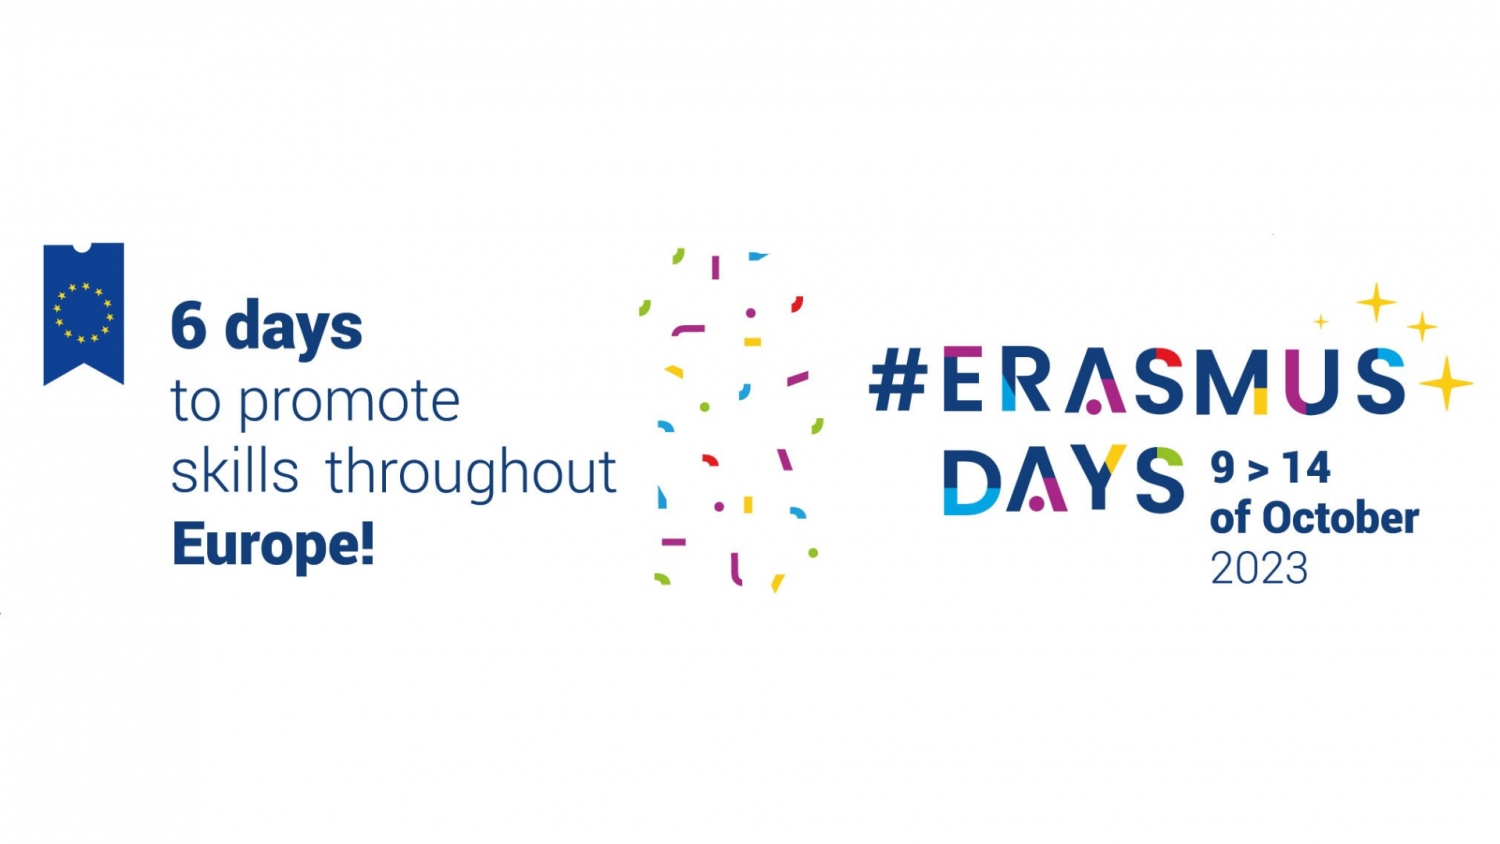 Launch of Erasmus days 2023 from 9th to 14th of September